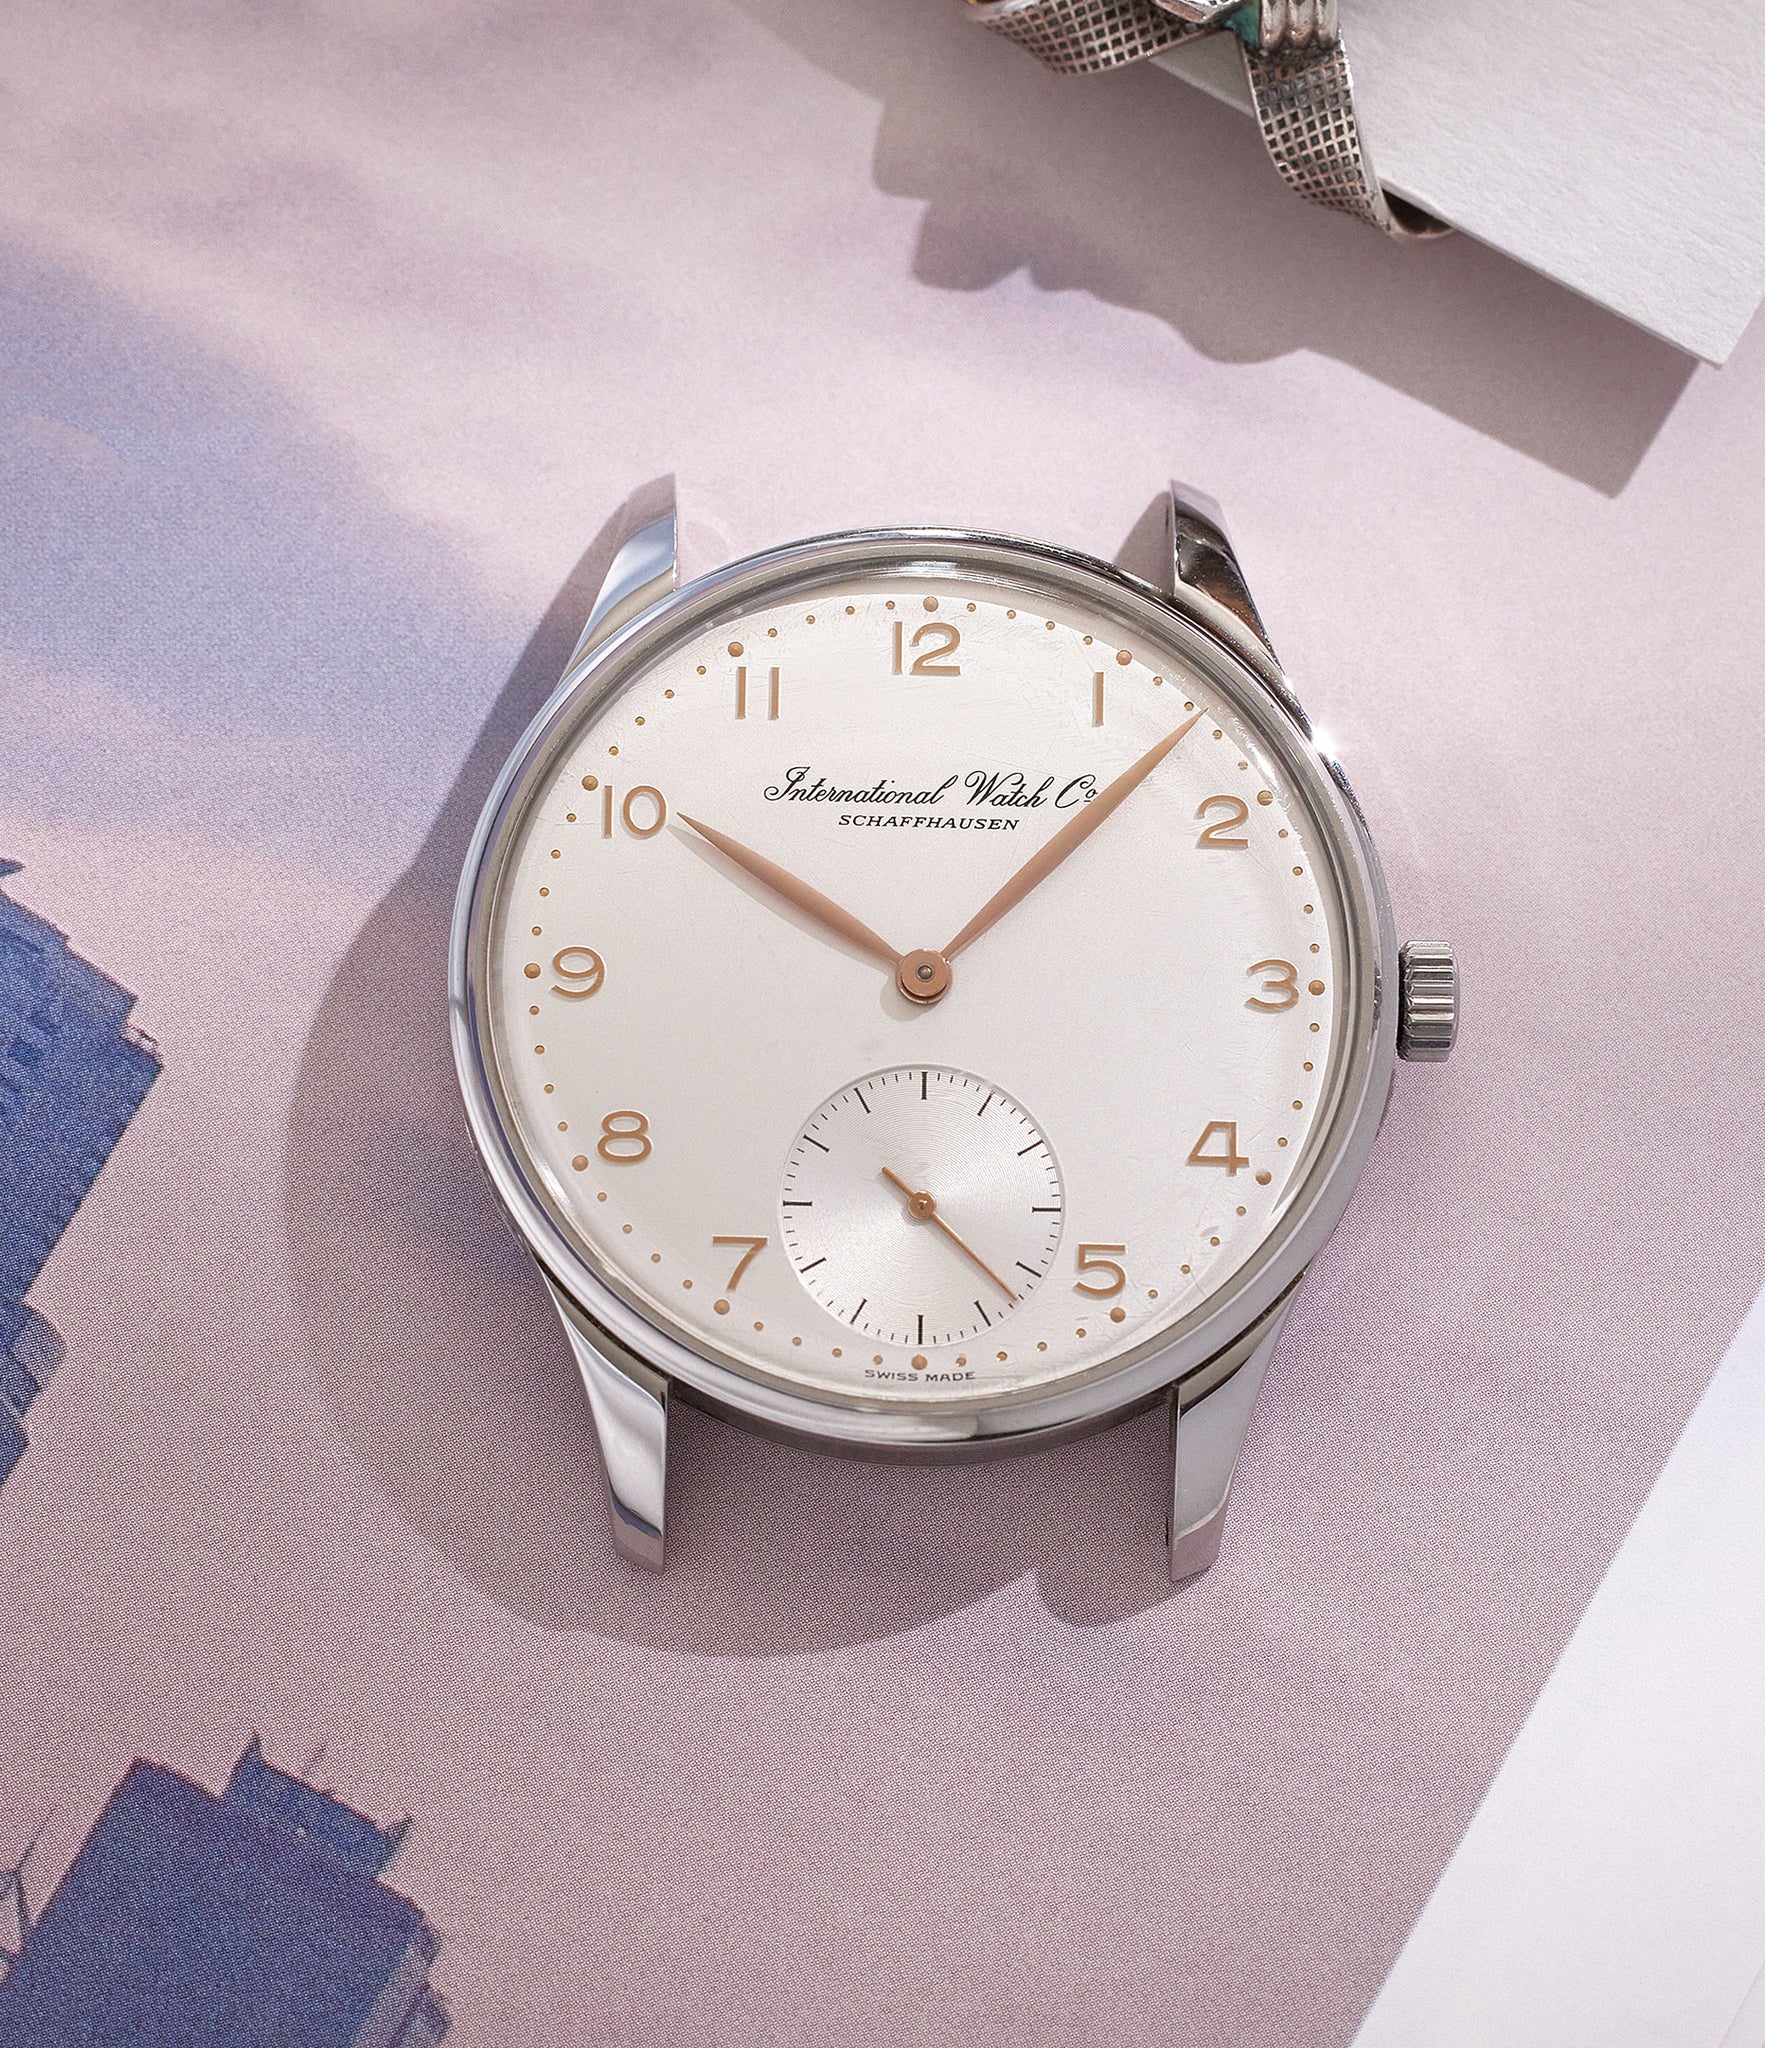 IWC Portuguese "Jubilee" | Steellimited series of 1000 watches made to celebrate the 125th anniversary of IWC in 1993 | A Collected Man | Available Worldwide